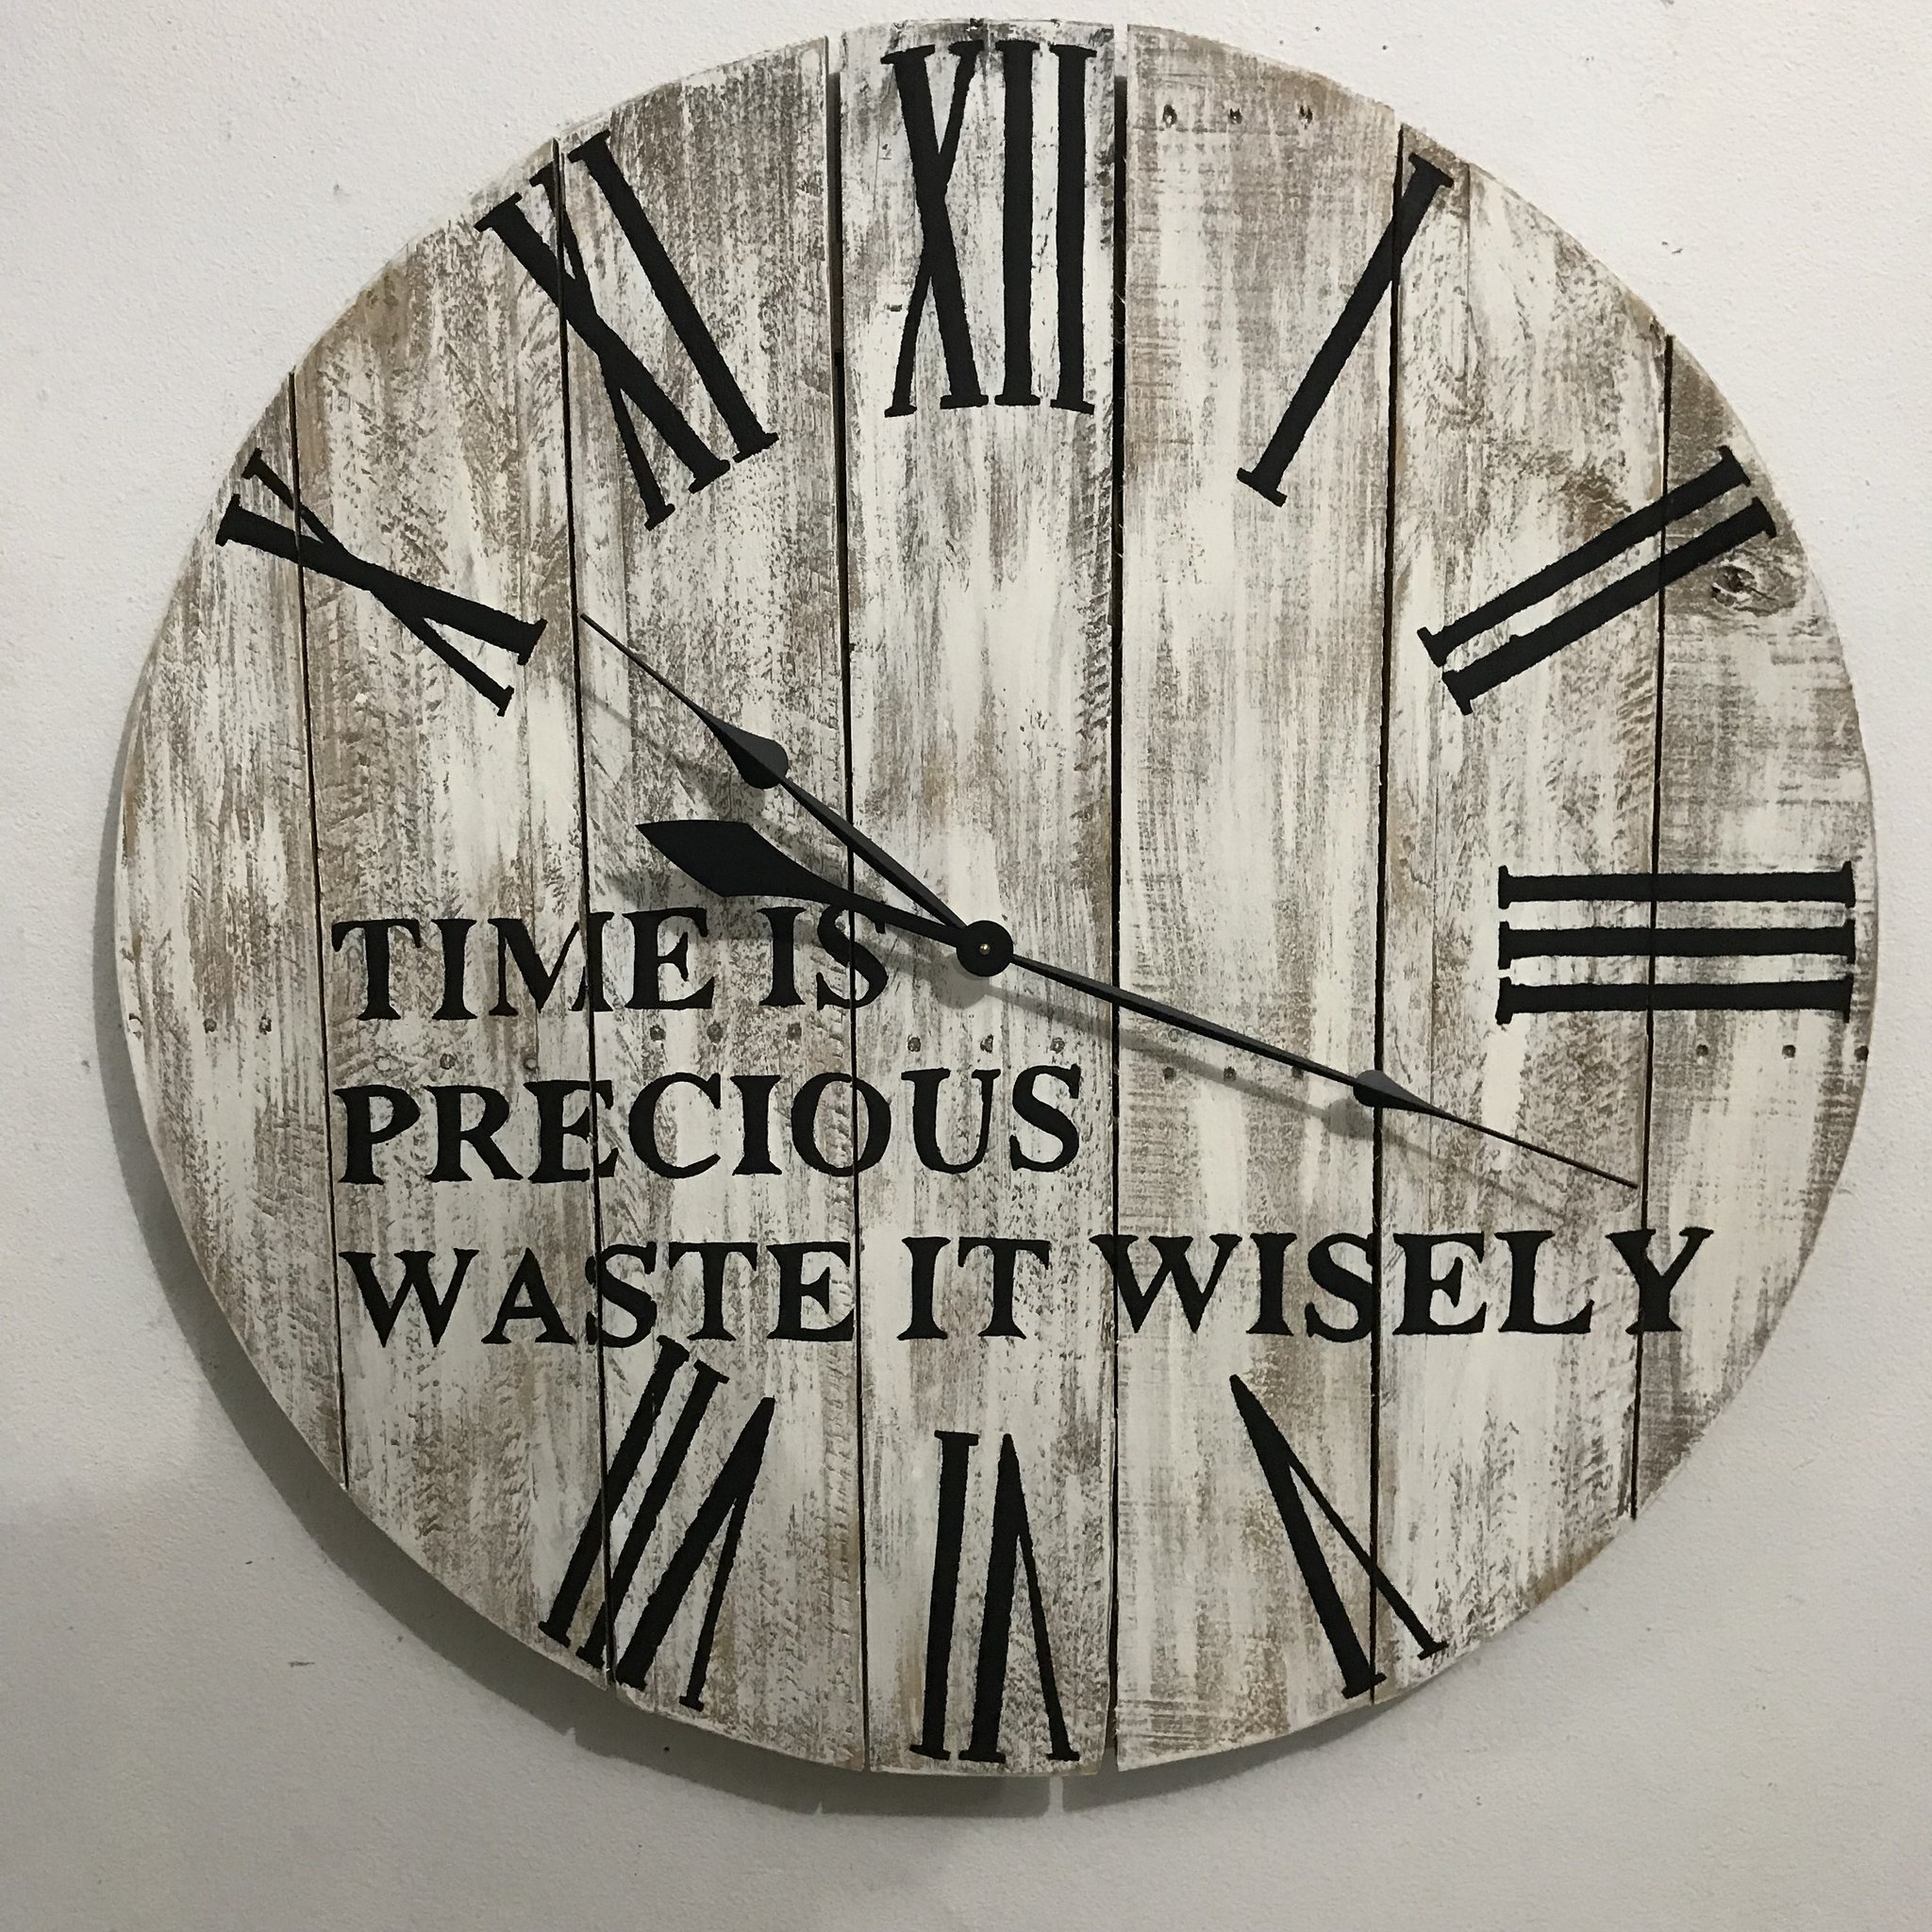 Living room rustic wooden round decorative wall clock